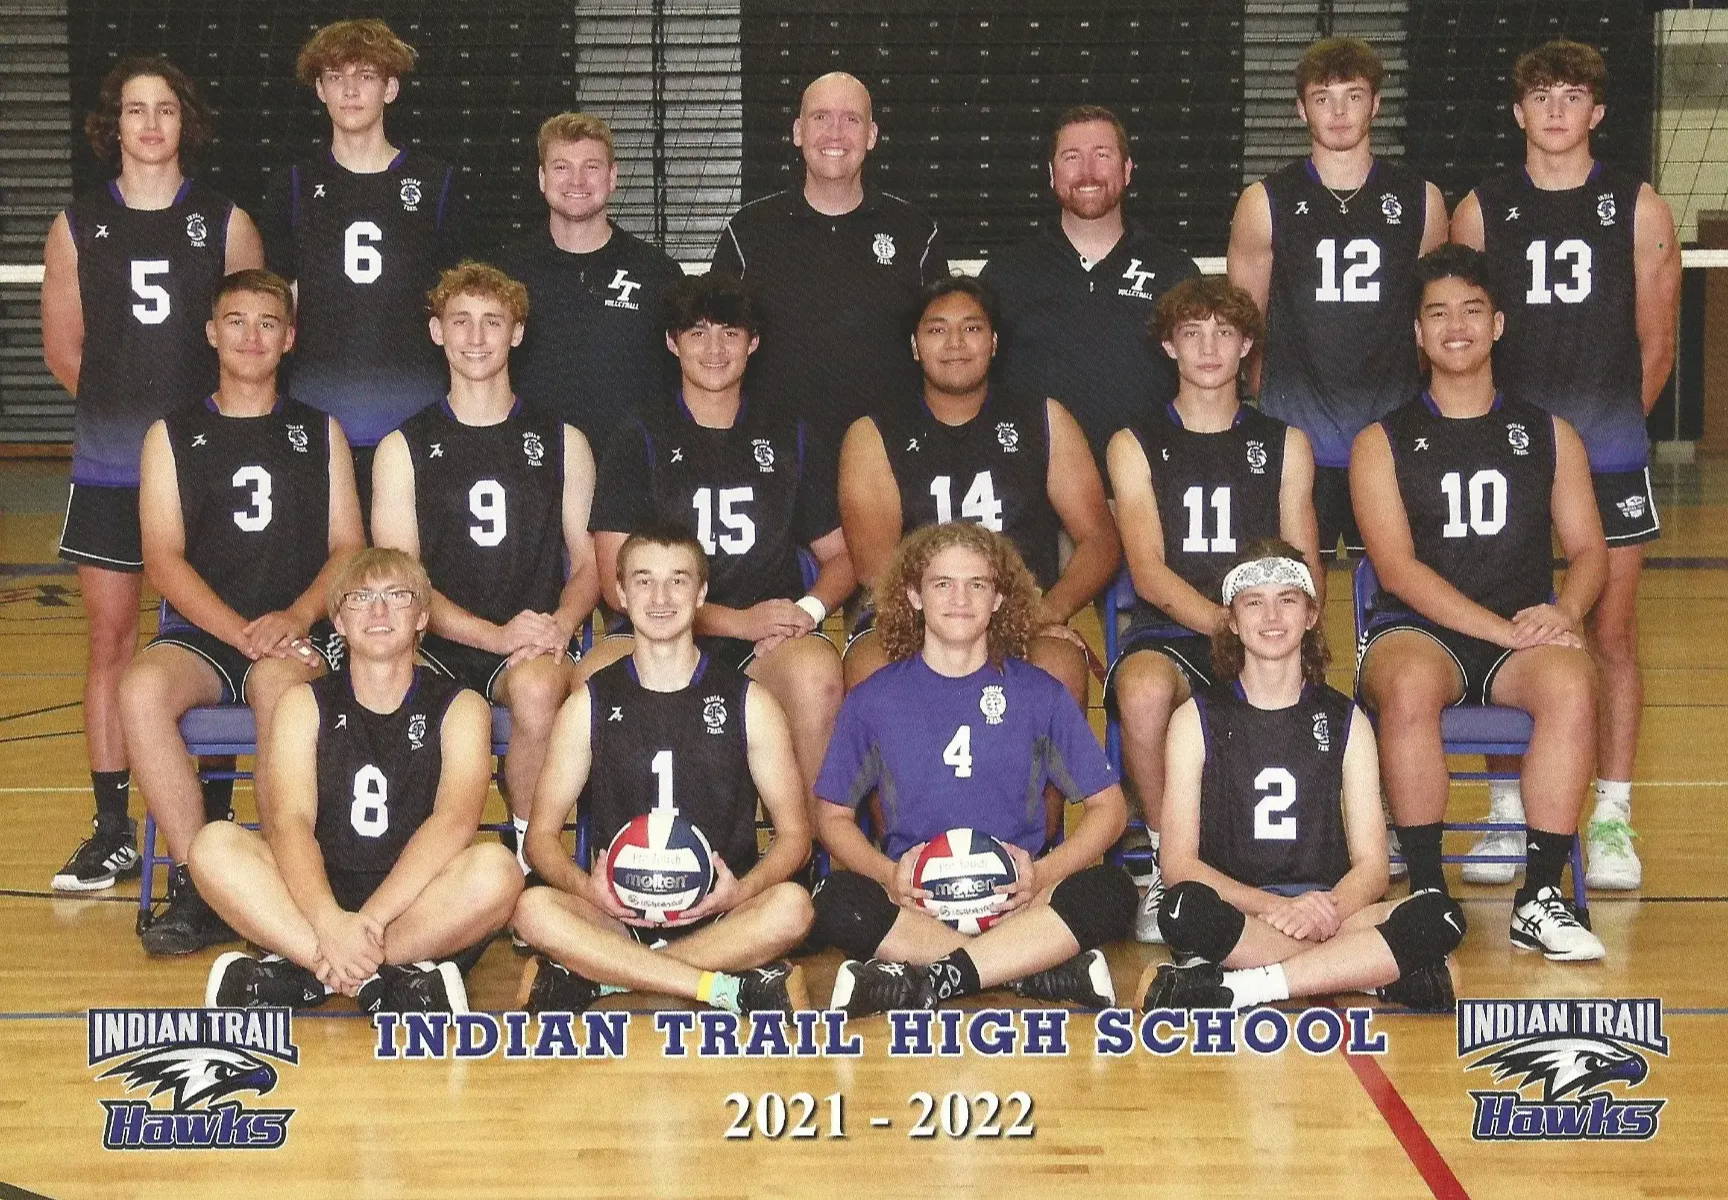 Indian Trail Boys Volleyball